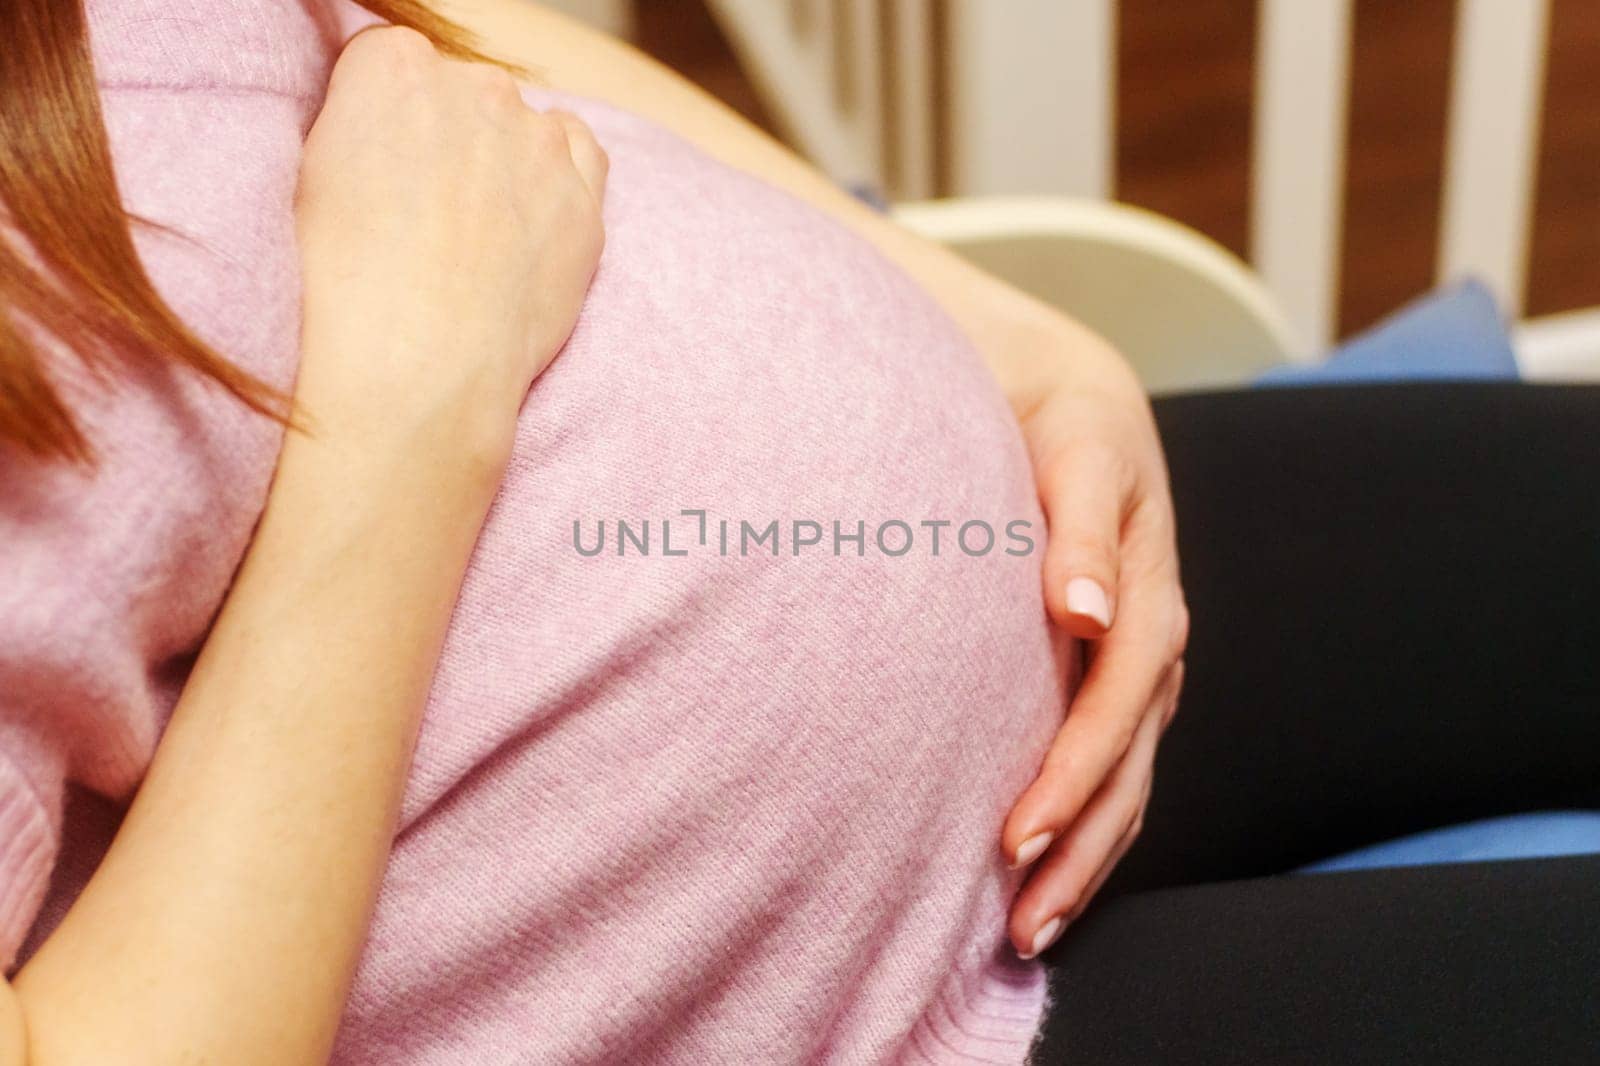 Anticipation and Connection: A Pregnant Woman Embracing the Life Growing Within Her by darksoul72